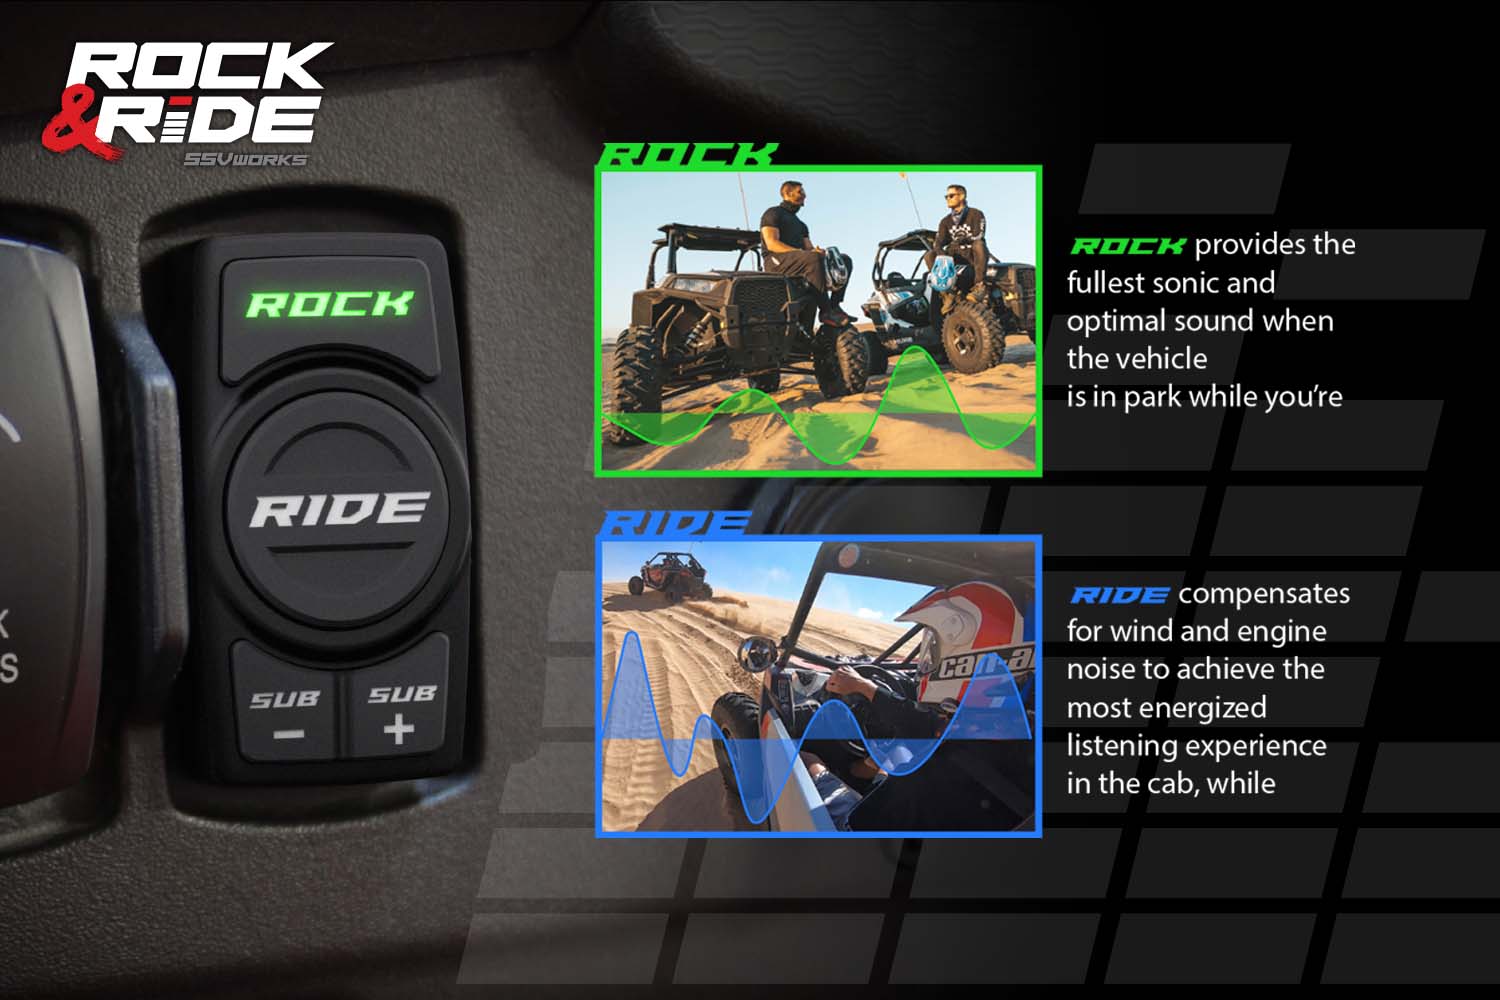 2014-2023 Polaris RZR SSV 3-Speaker Plug-&-Play System for Ride Command - OffRoad HQ